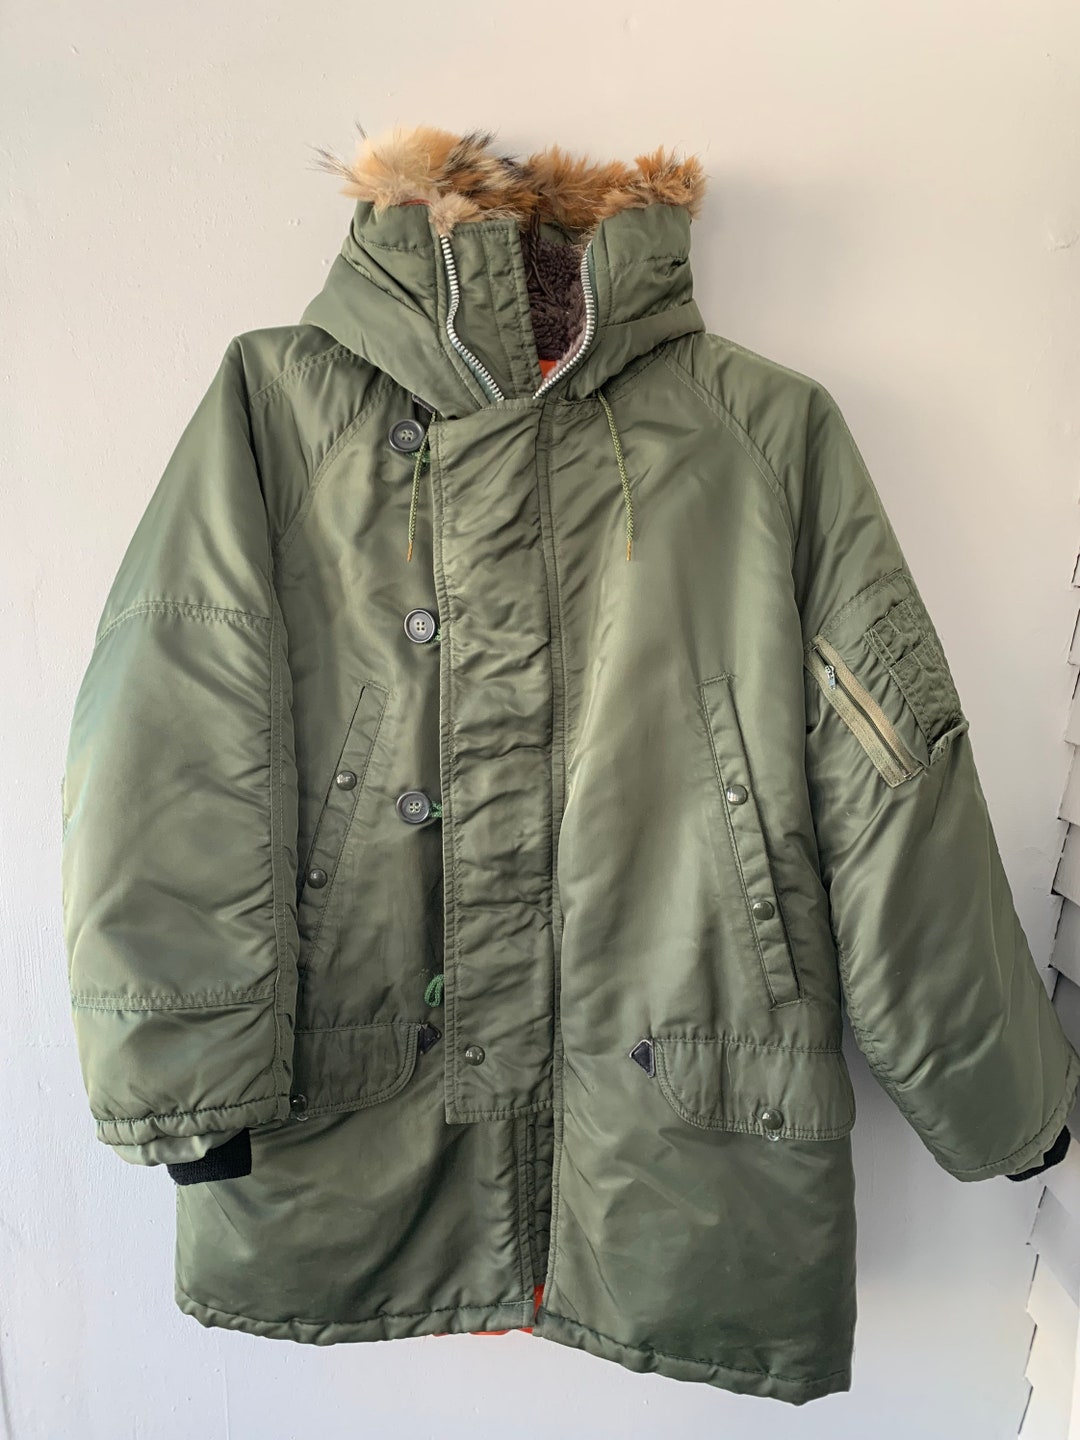 N-3B Parka by Golden Fleece Made in USA - Etsy